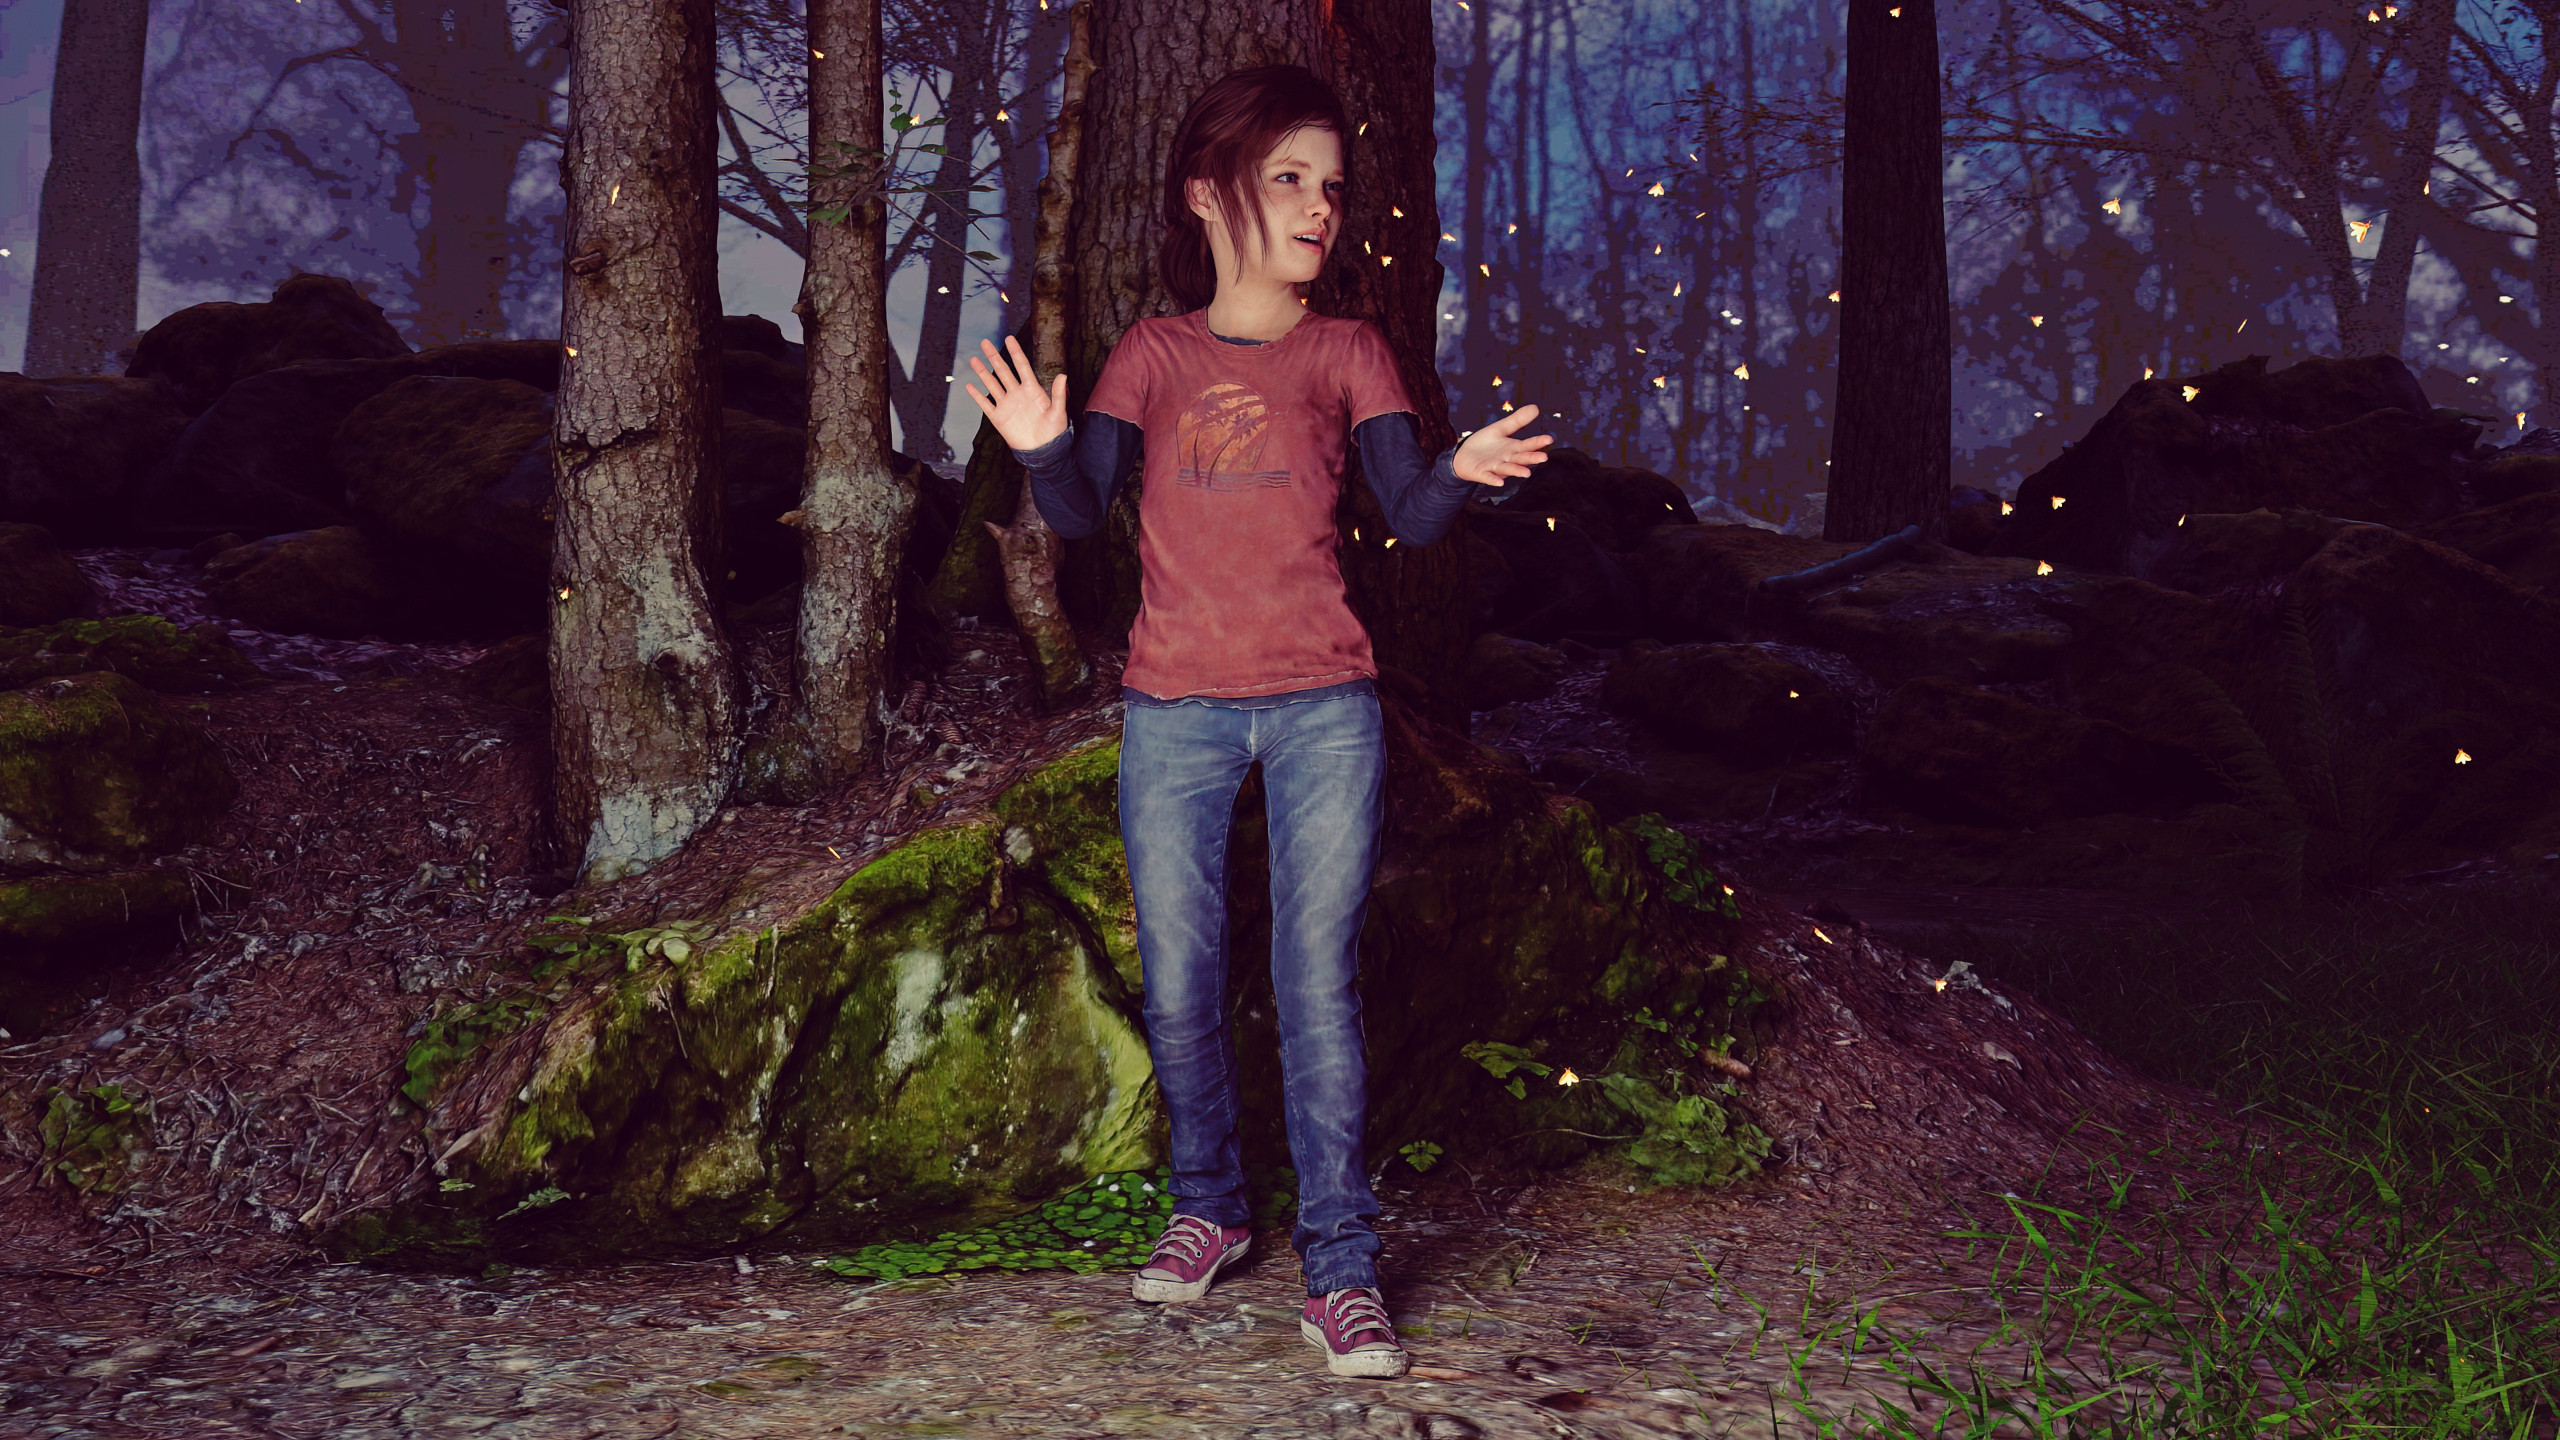 Ellie with the Fireflies by Mystix3D